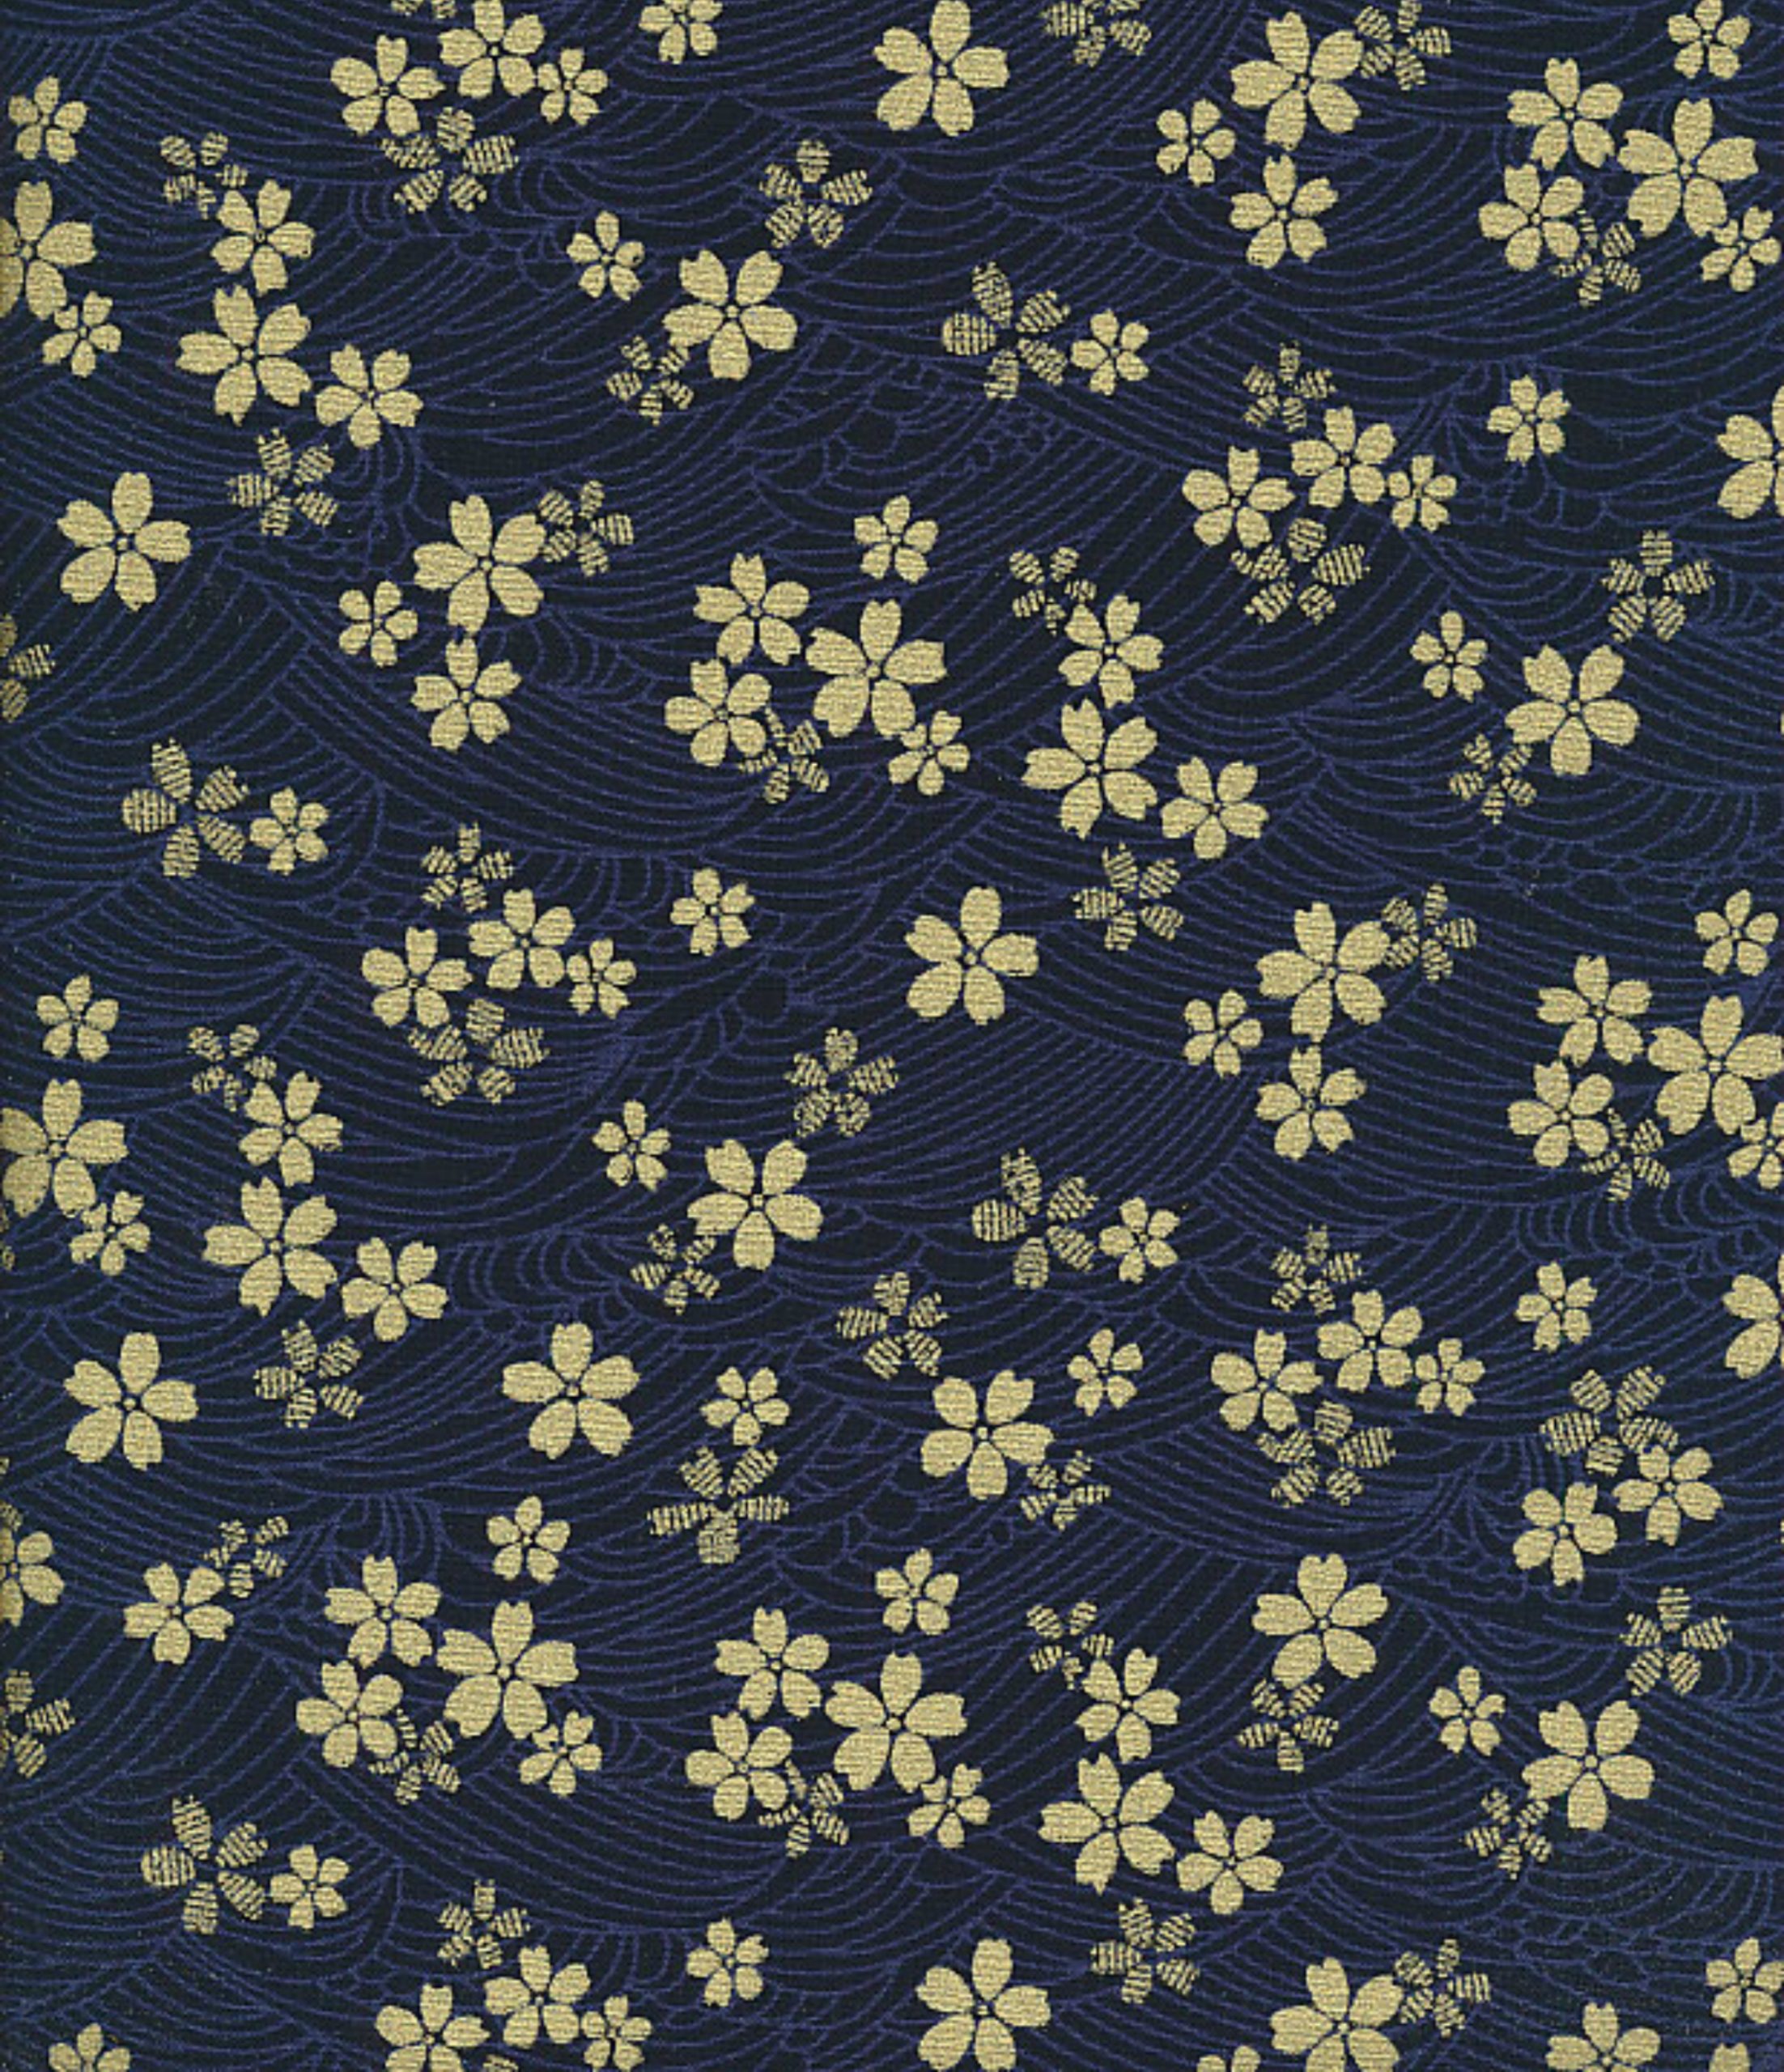 100% Cotton Japanese Gilded Fabric Golden Flowers On Navy blue Waves